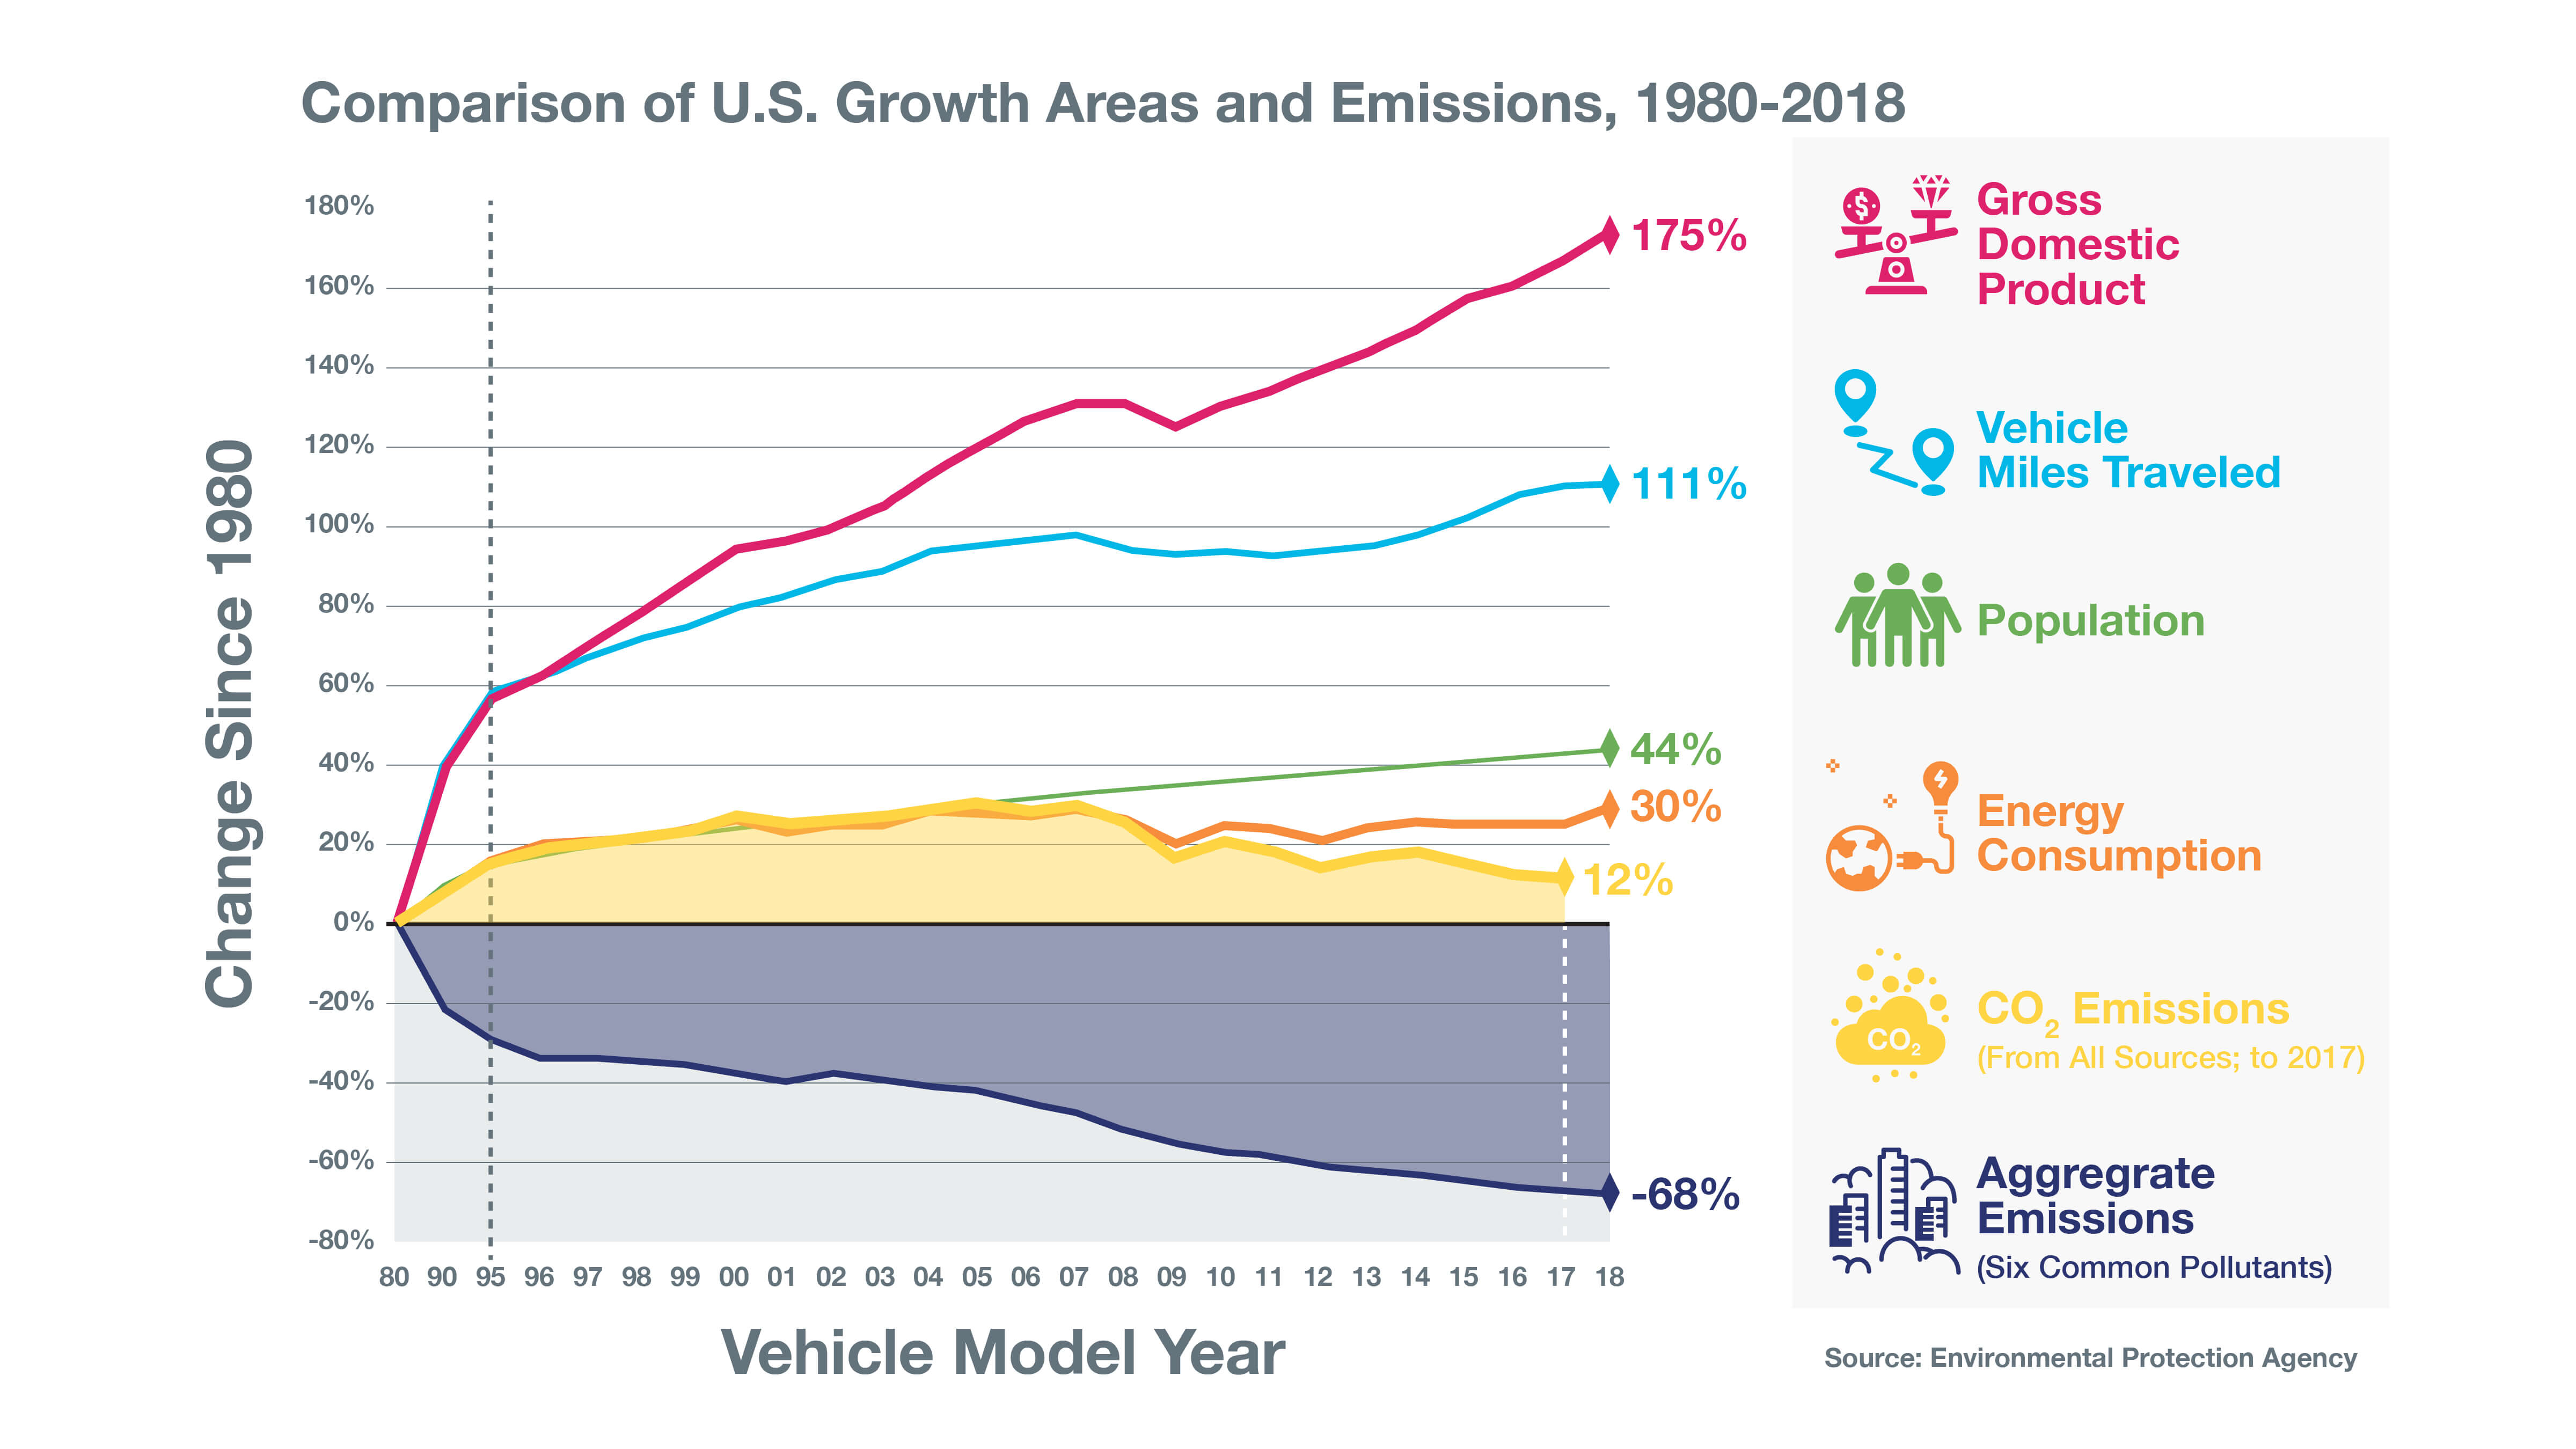 Comparison of U.S. Growth Areas and Emissions, 1980-2018